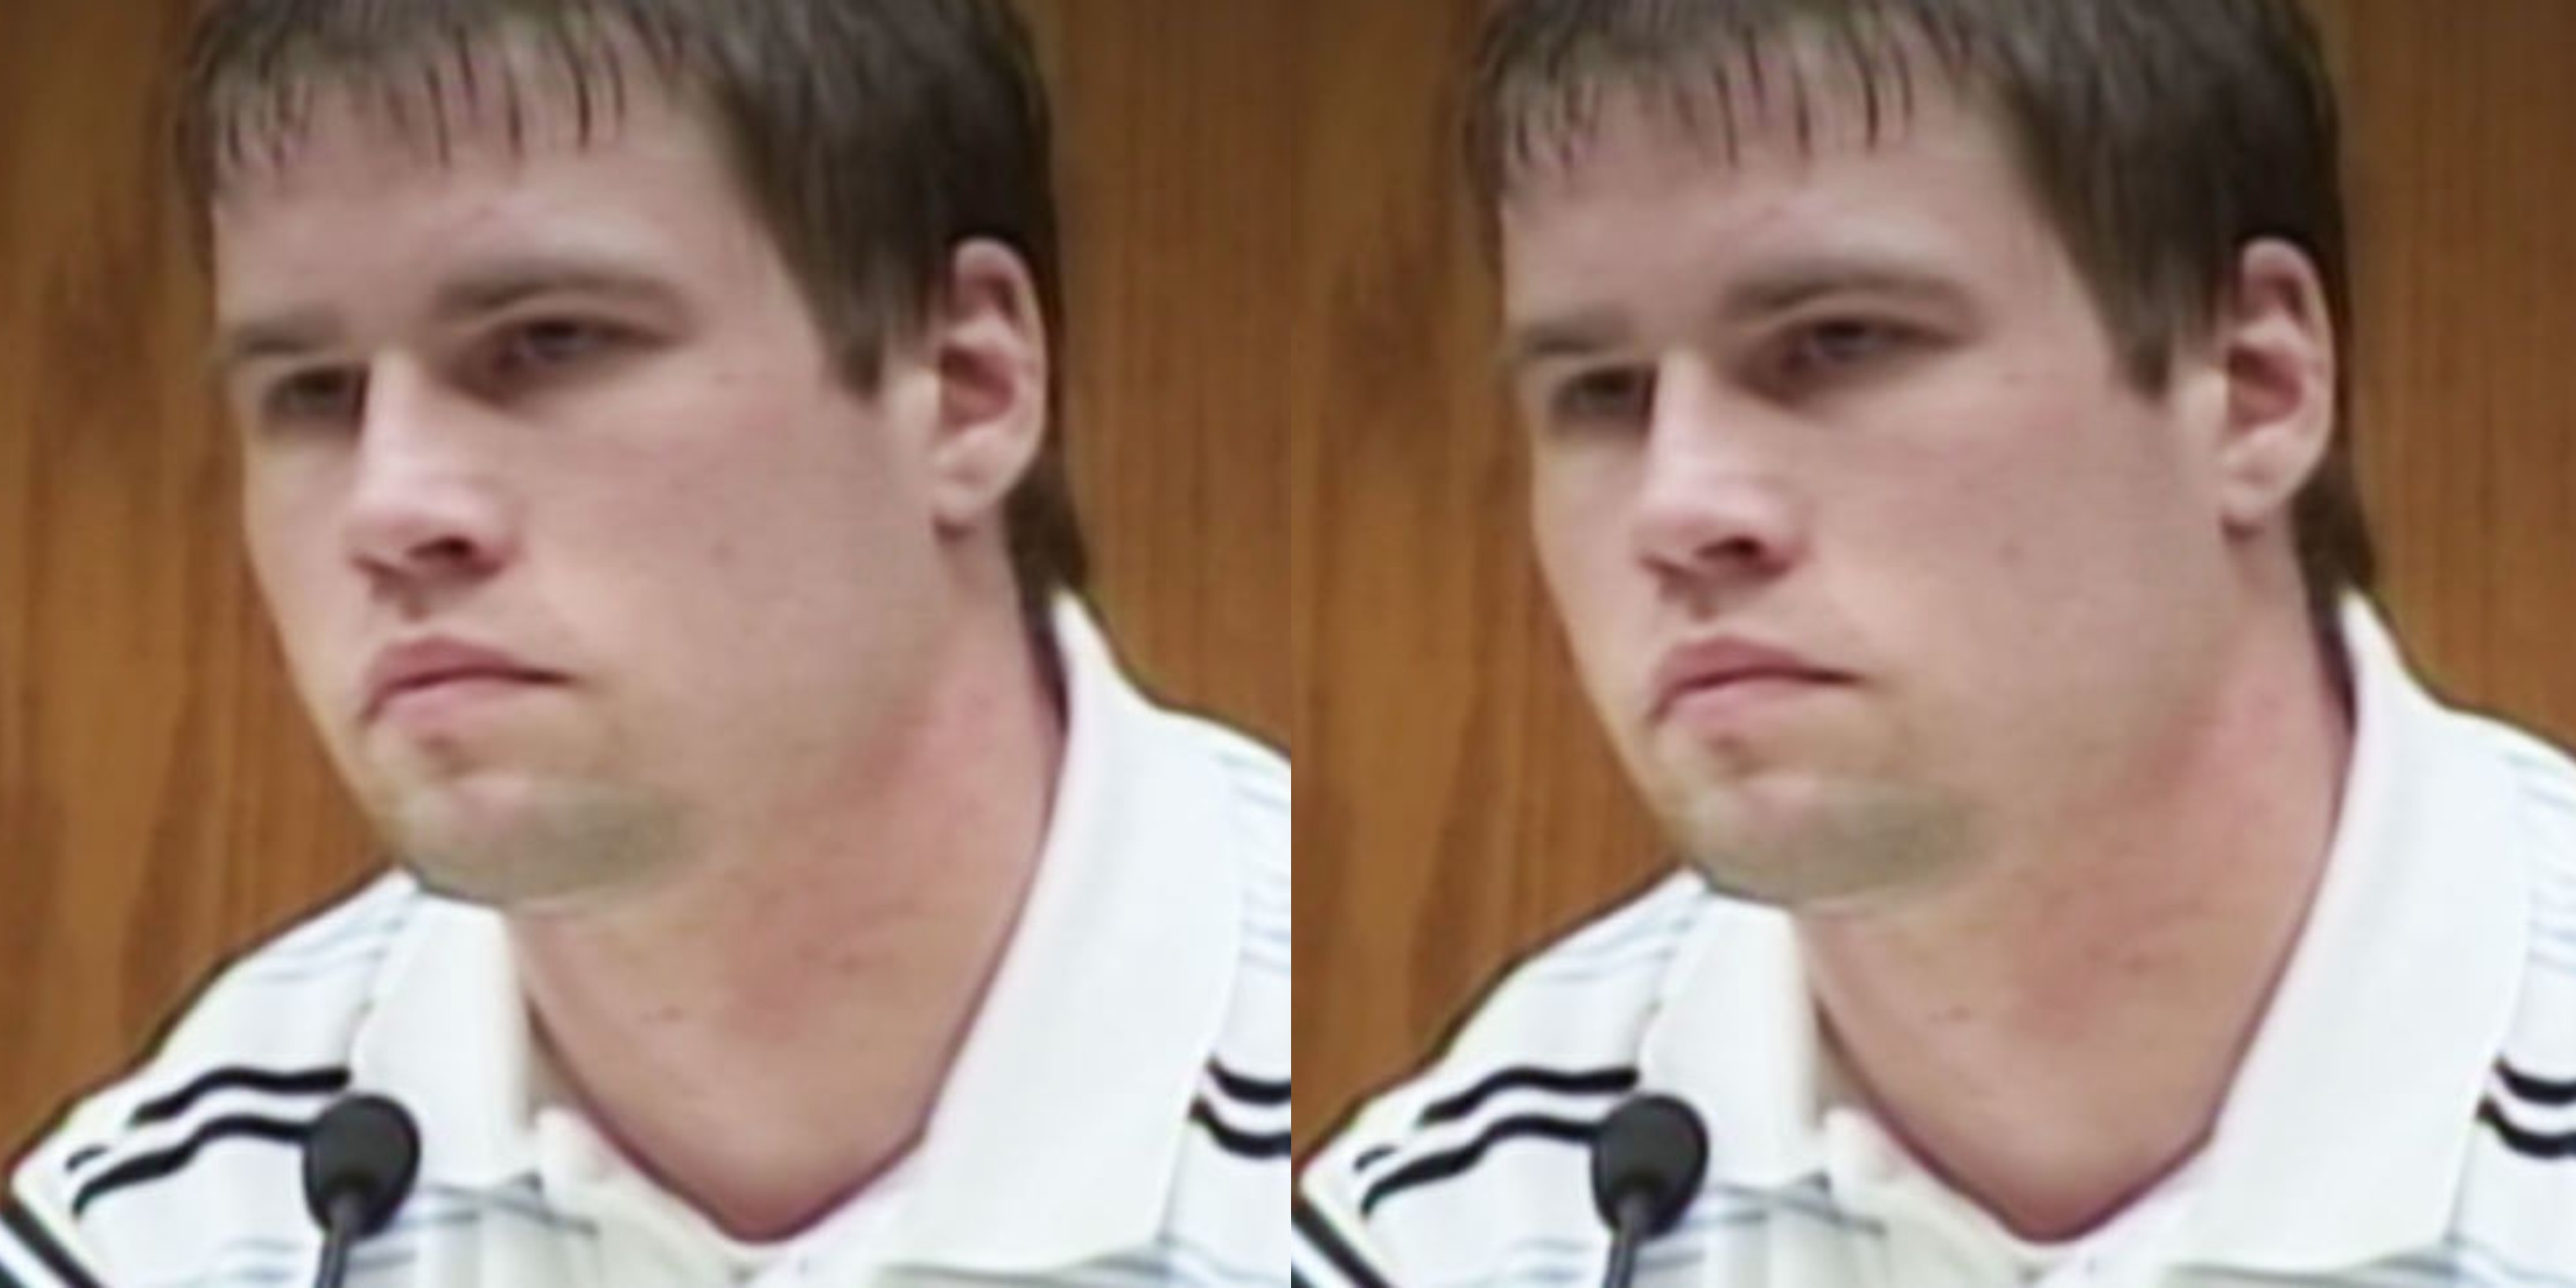 Who Is Brenden Dassey's Brother? Details Steven Avery Lawyer Killed Teresa Halbach